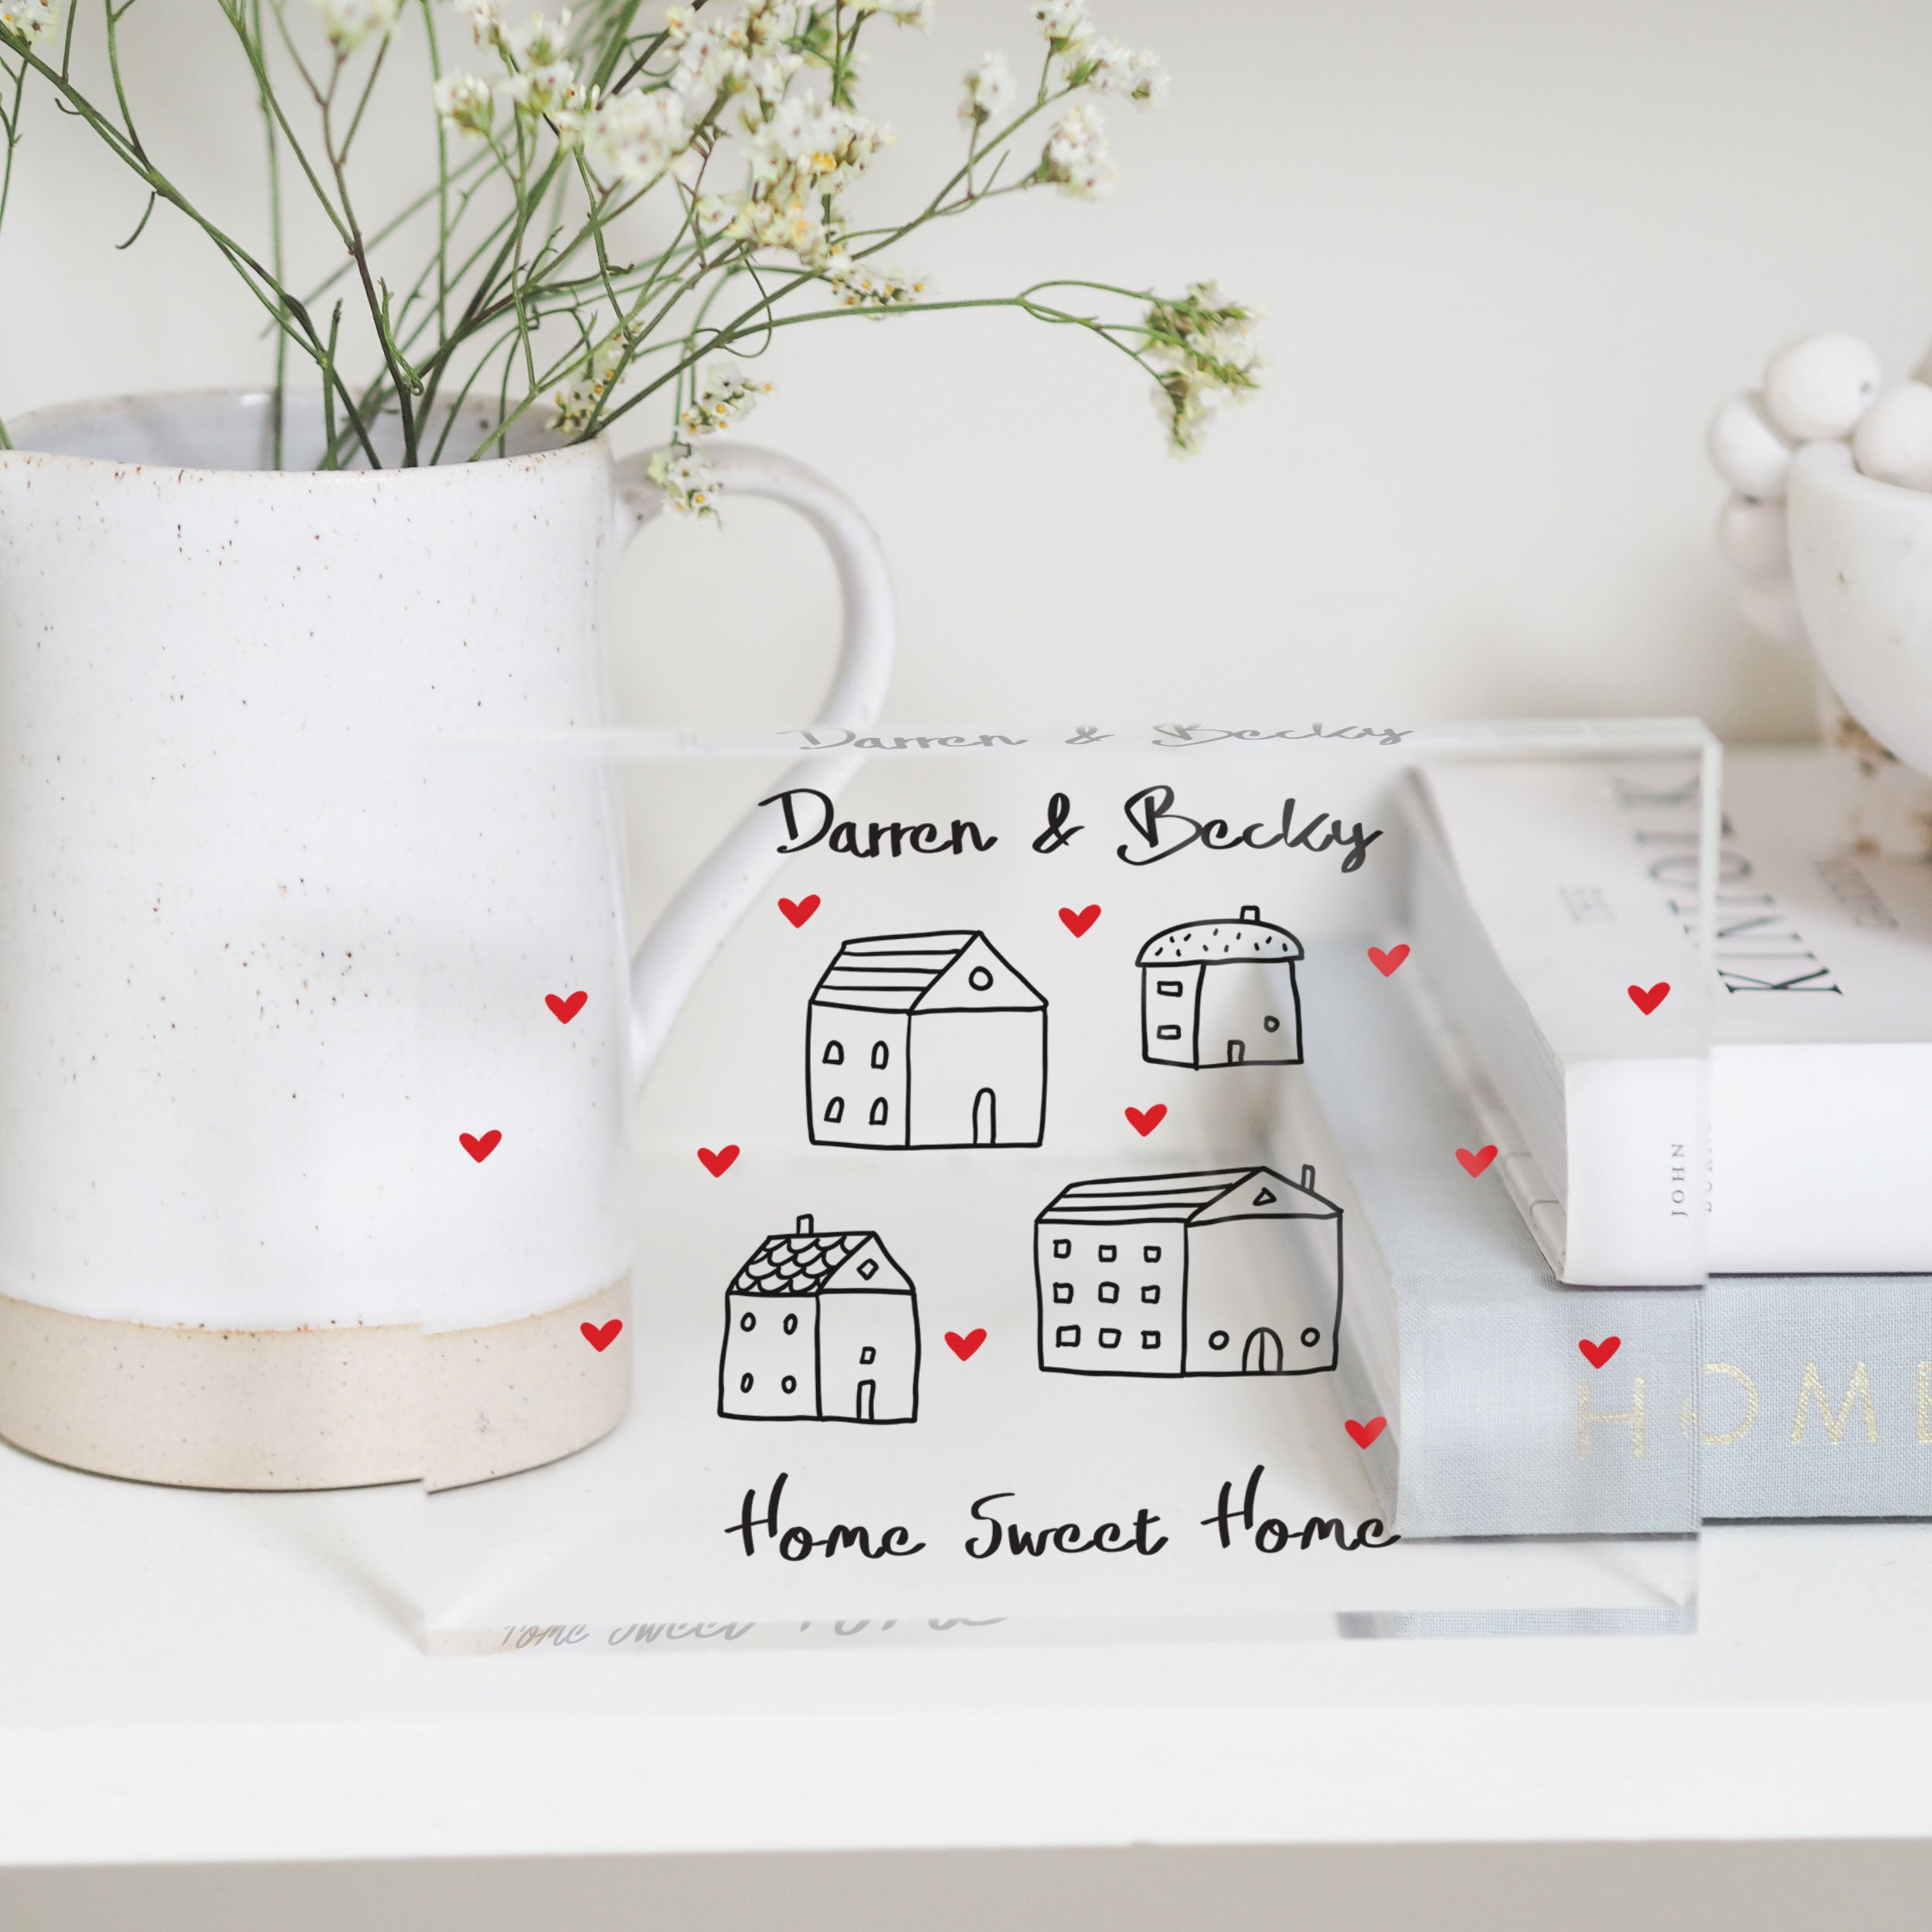 Home sweet home sign glass block